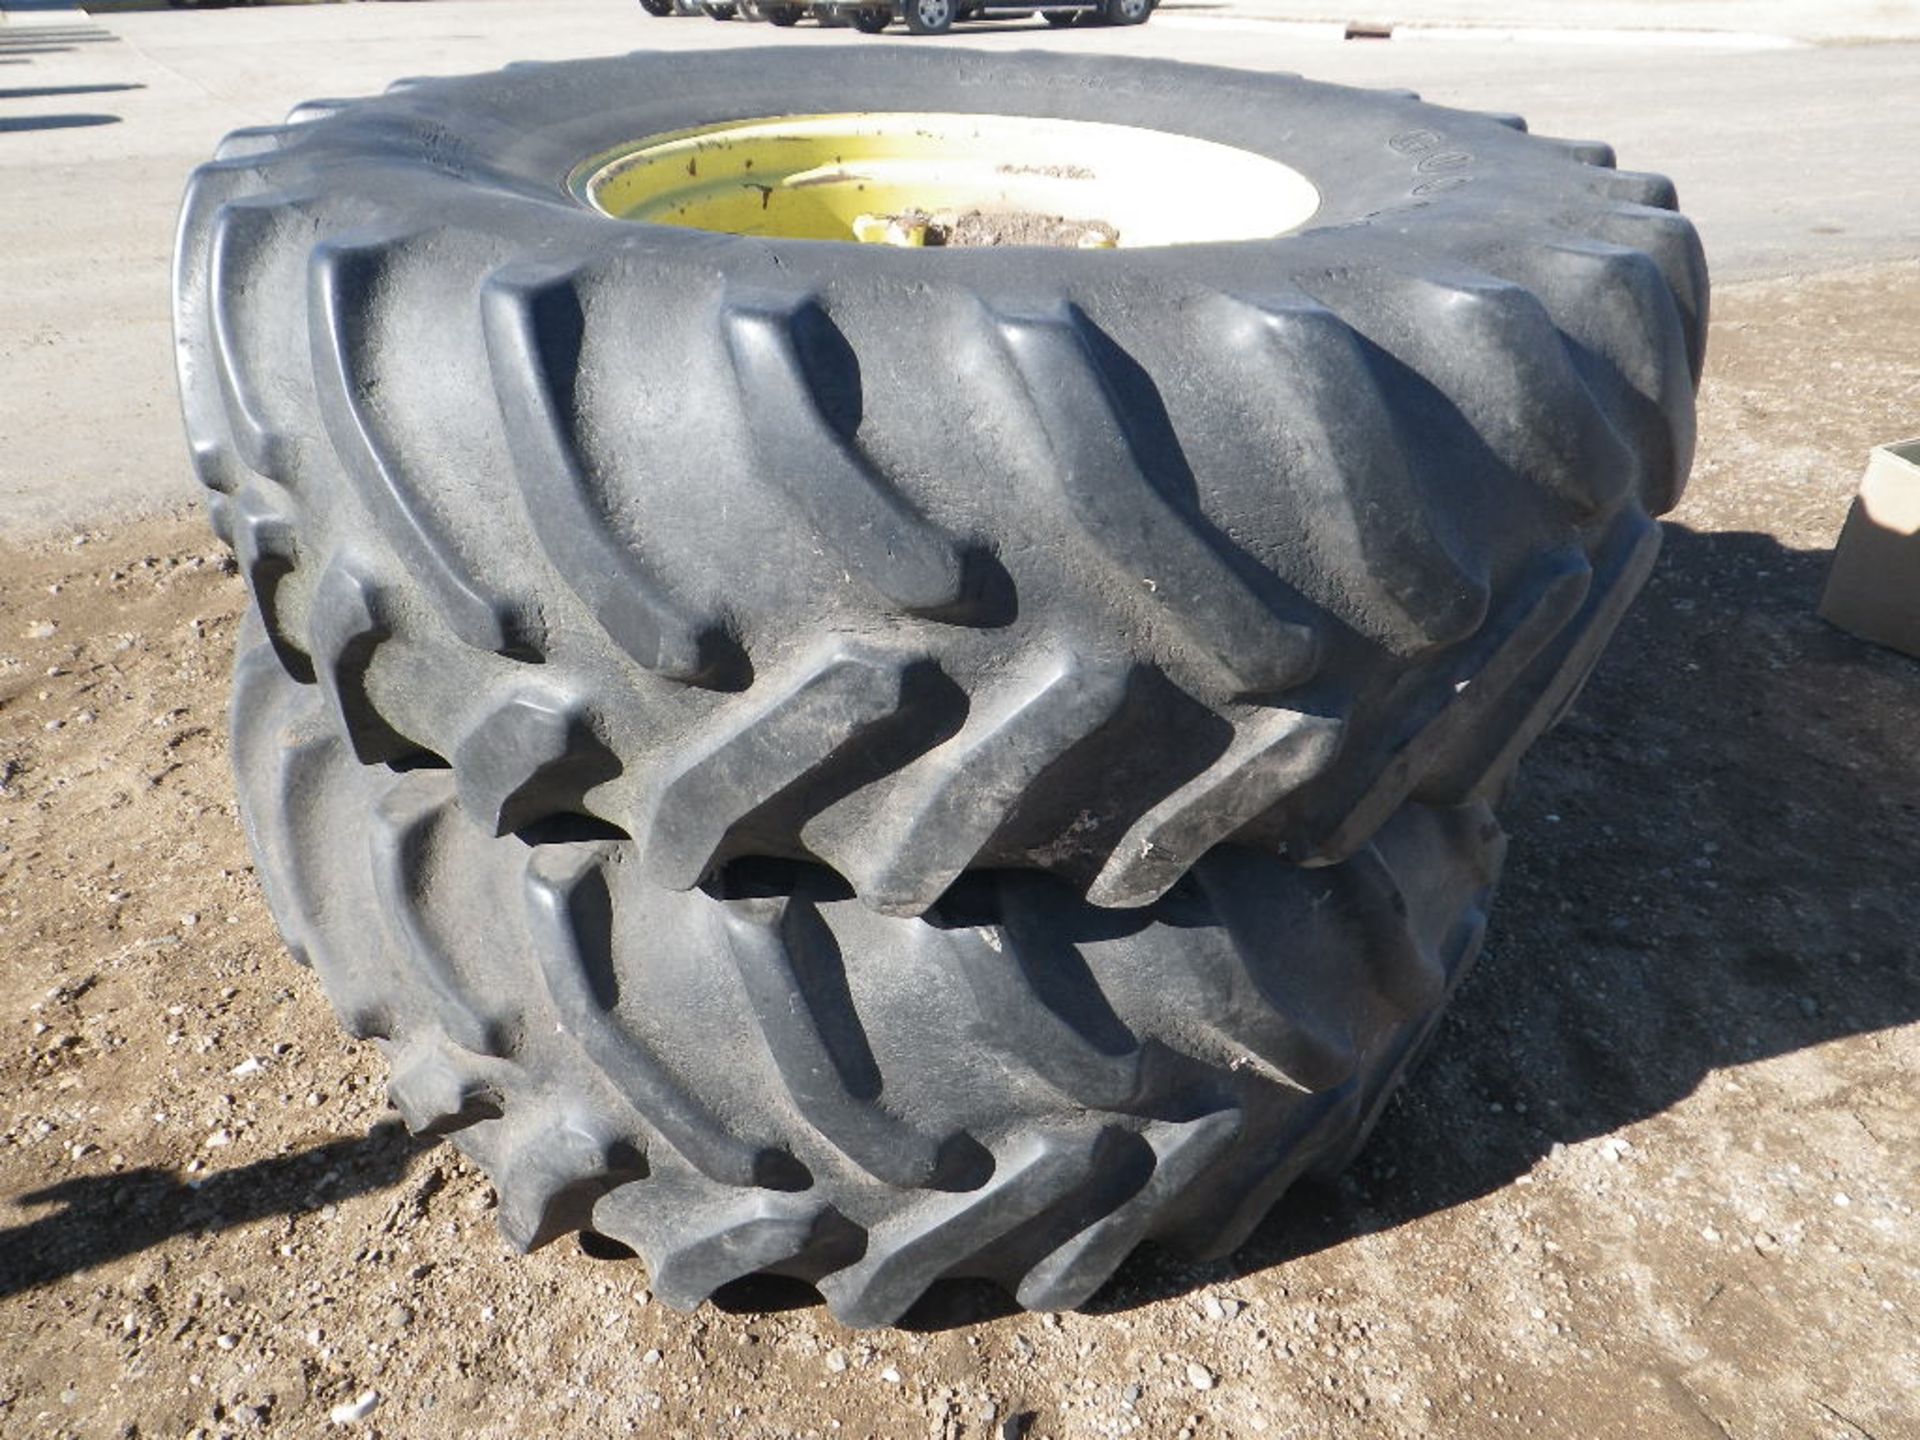 (26) 1 PAIR 18.4X26 MFWD FRONT TIRES AND RIMS FOR JD 4755, 12 HOLE - Image 2 of 3